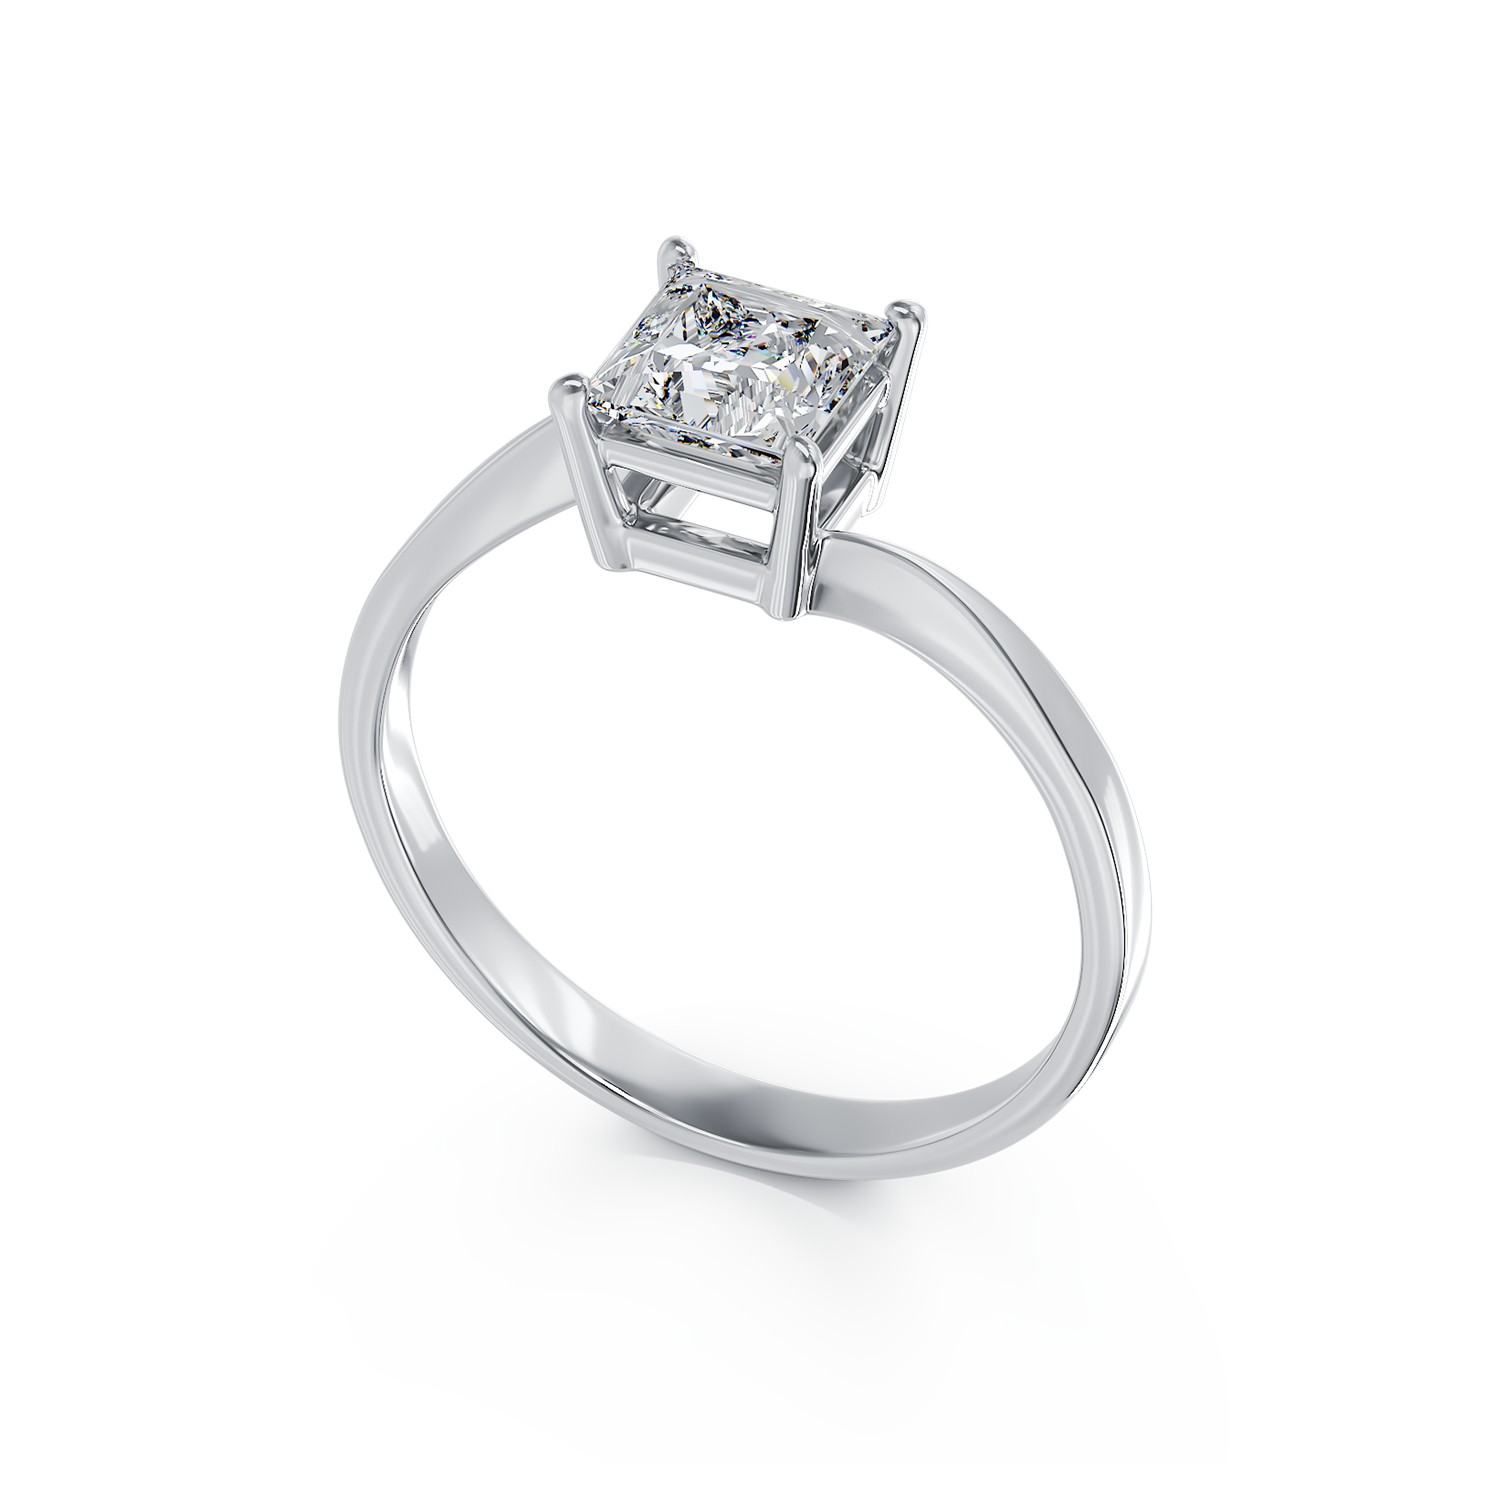 18K white gold engagement ring with a 0.7ct solitaire diamond